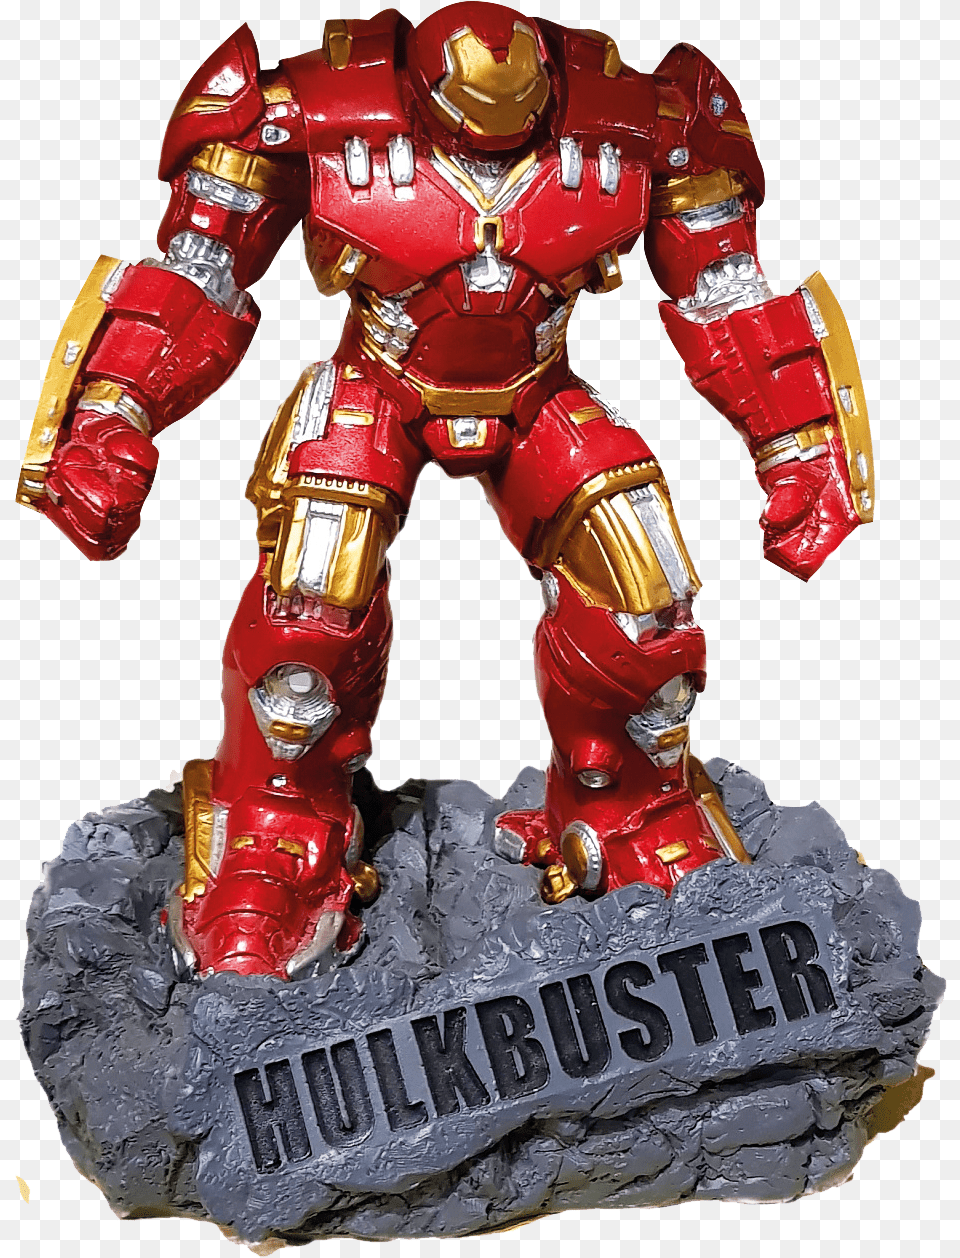 U201ci Have Always Loved Comic Books Iron Man Full Action Figure, Toy, Robot Png Image